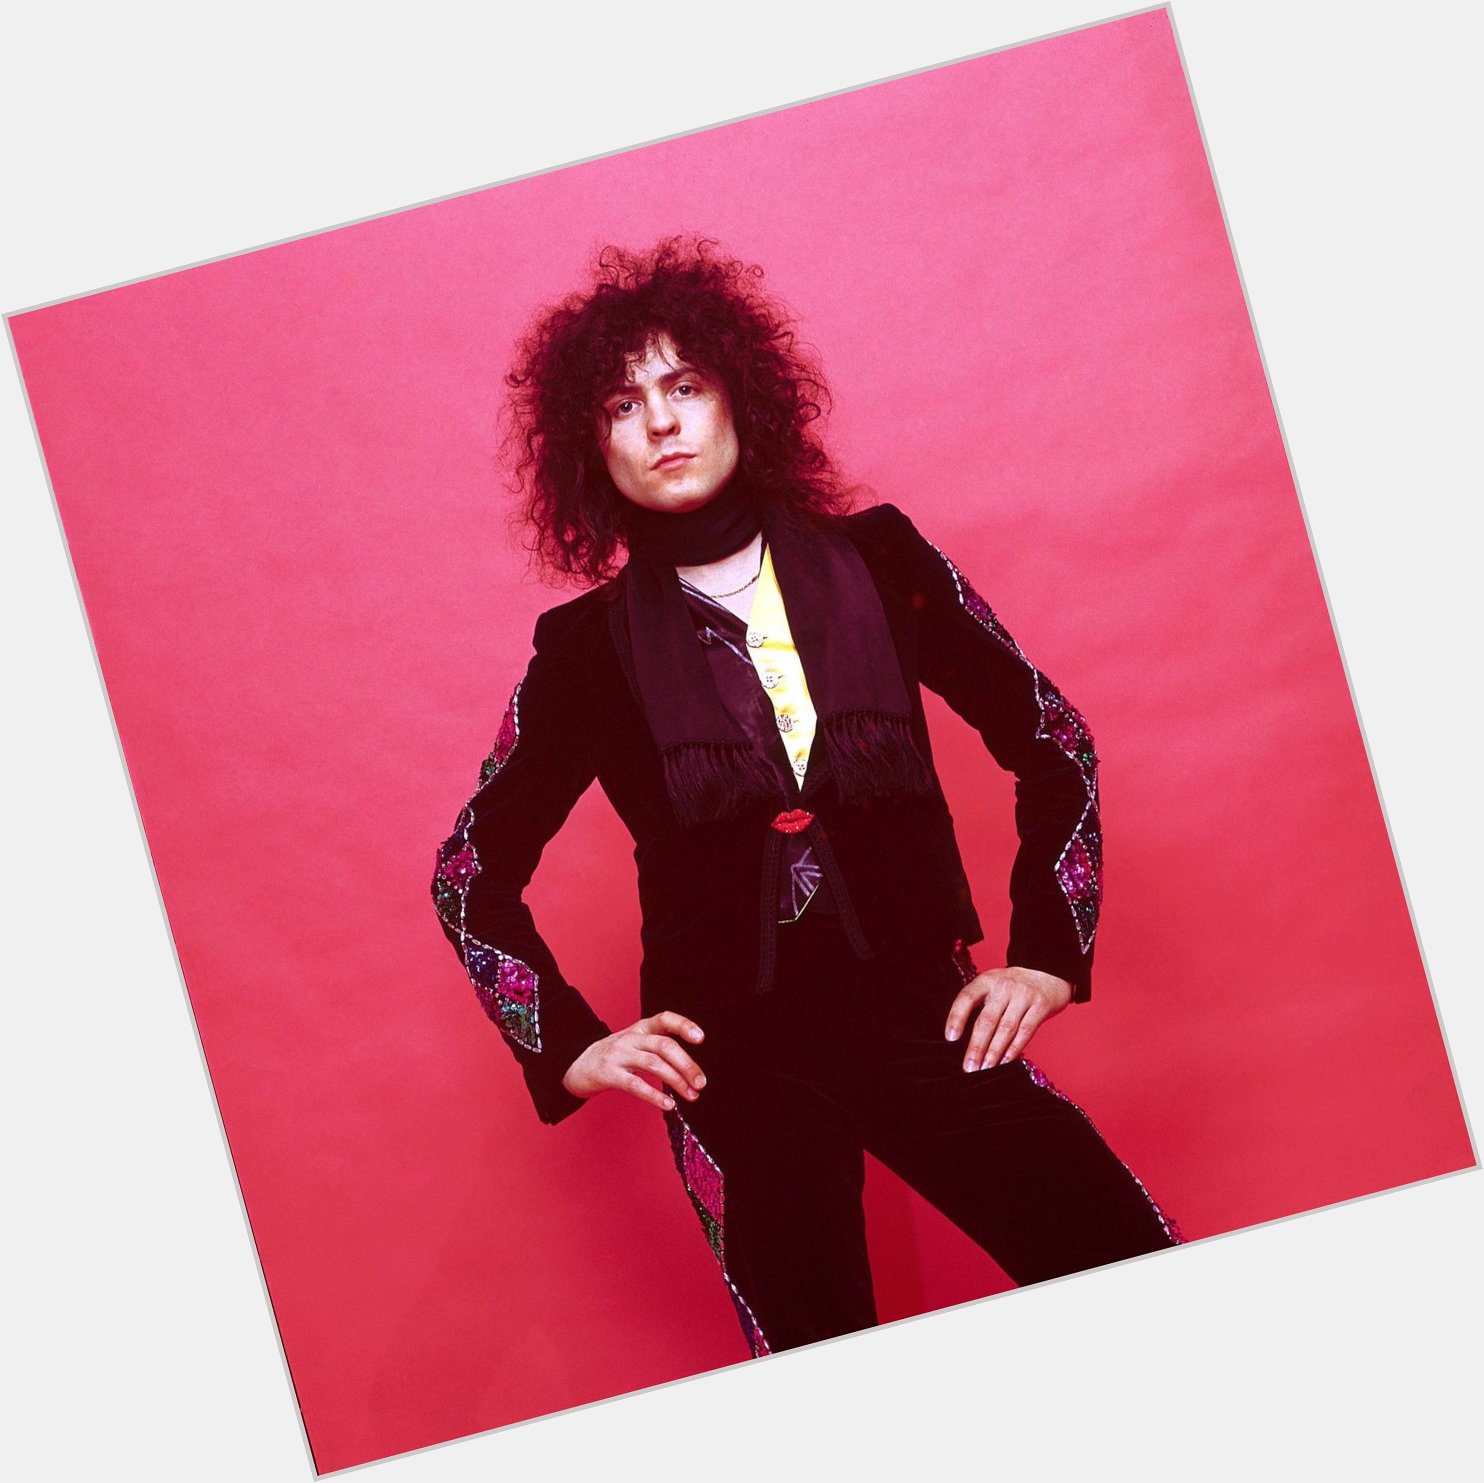 Today, Marc Bolan would have been 72. Happy Birthday to my glam rock hero. 